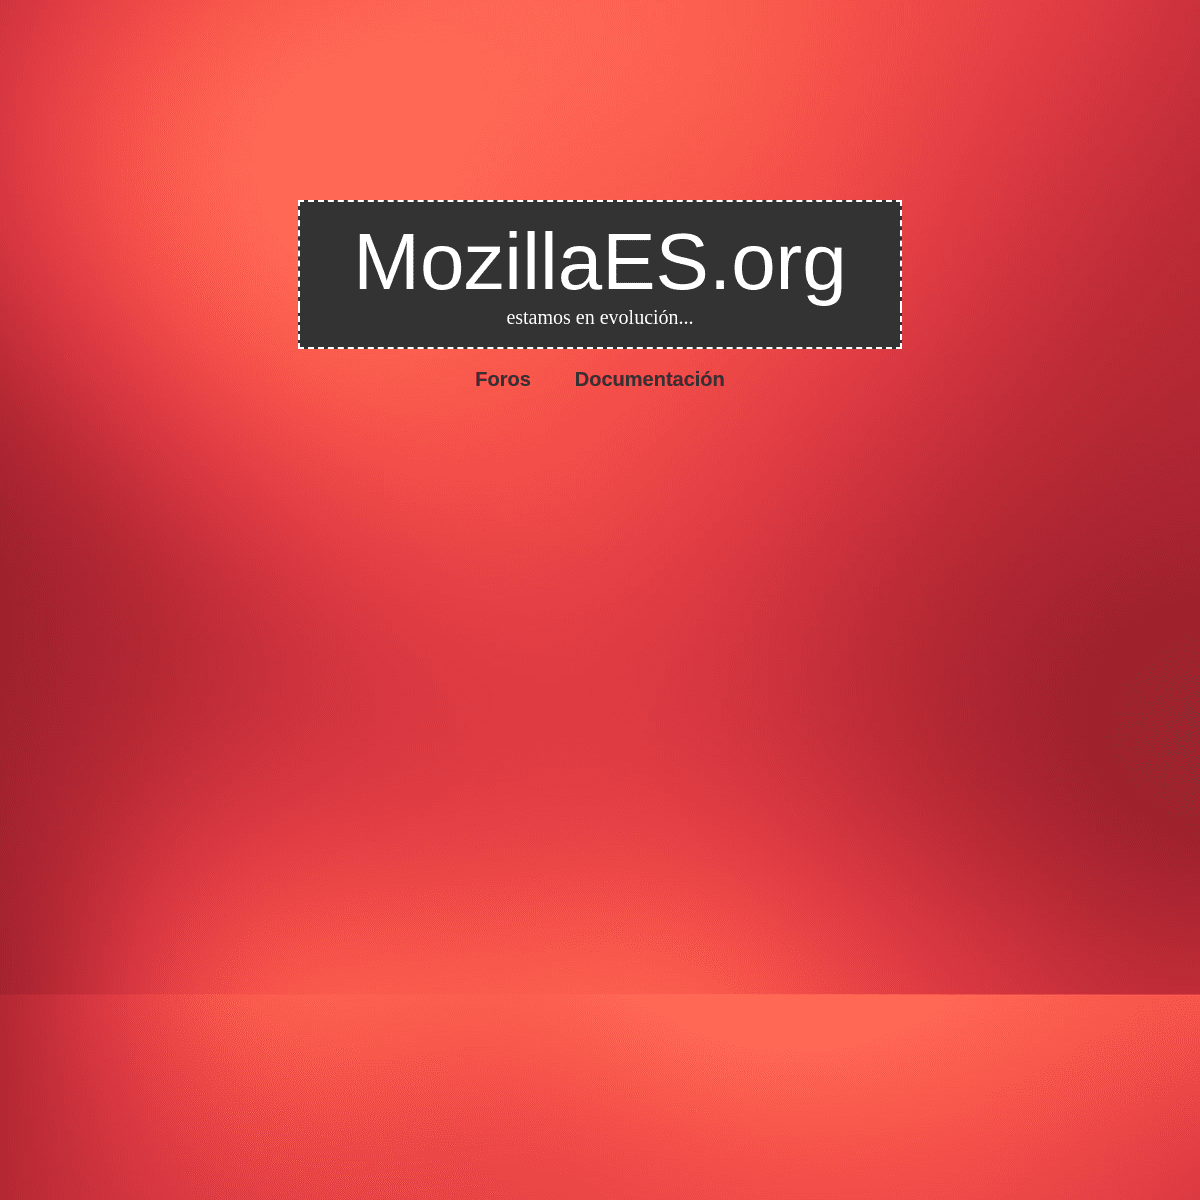 A complete backup of mozillaes.org